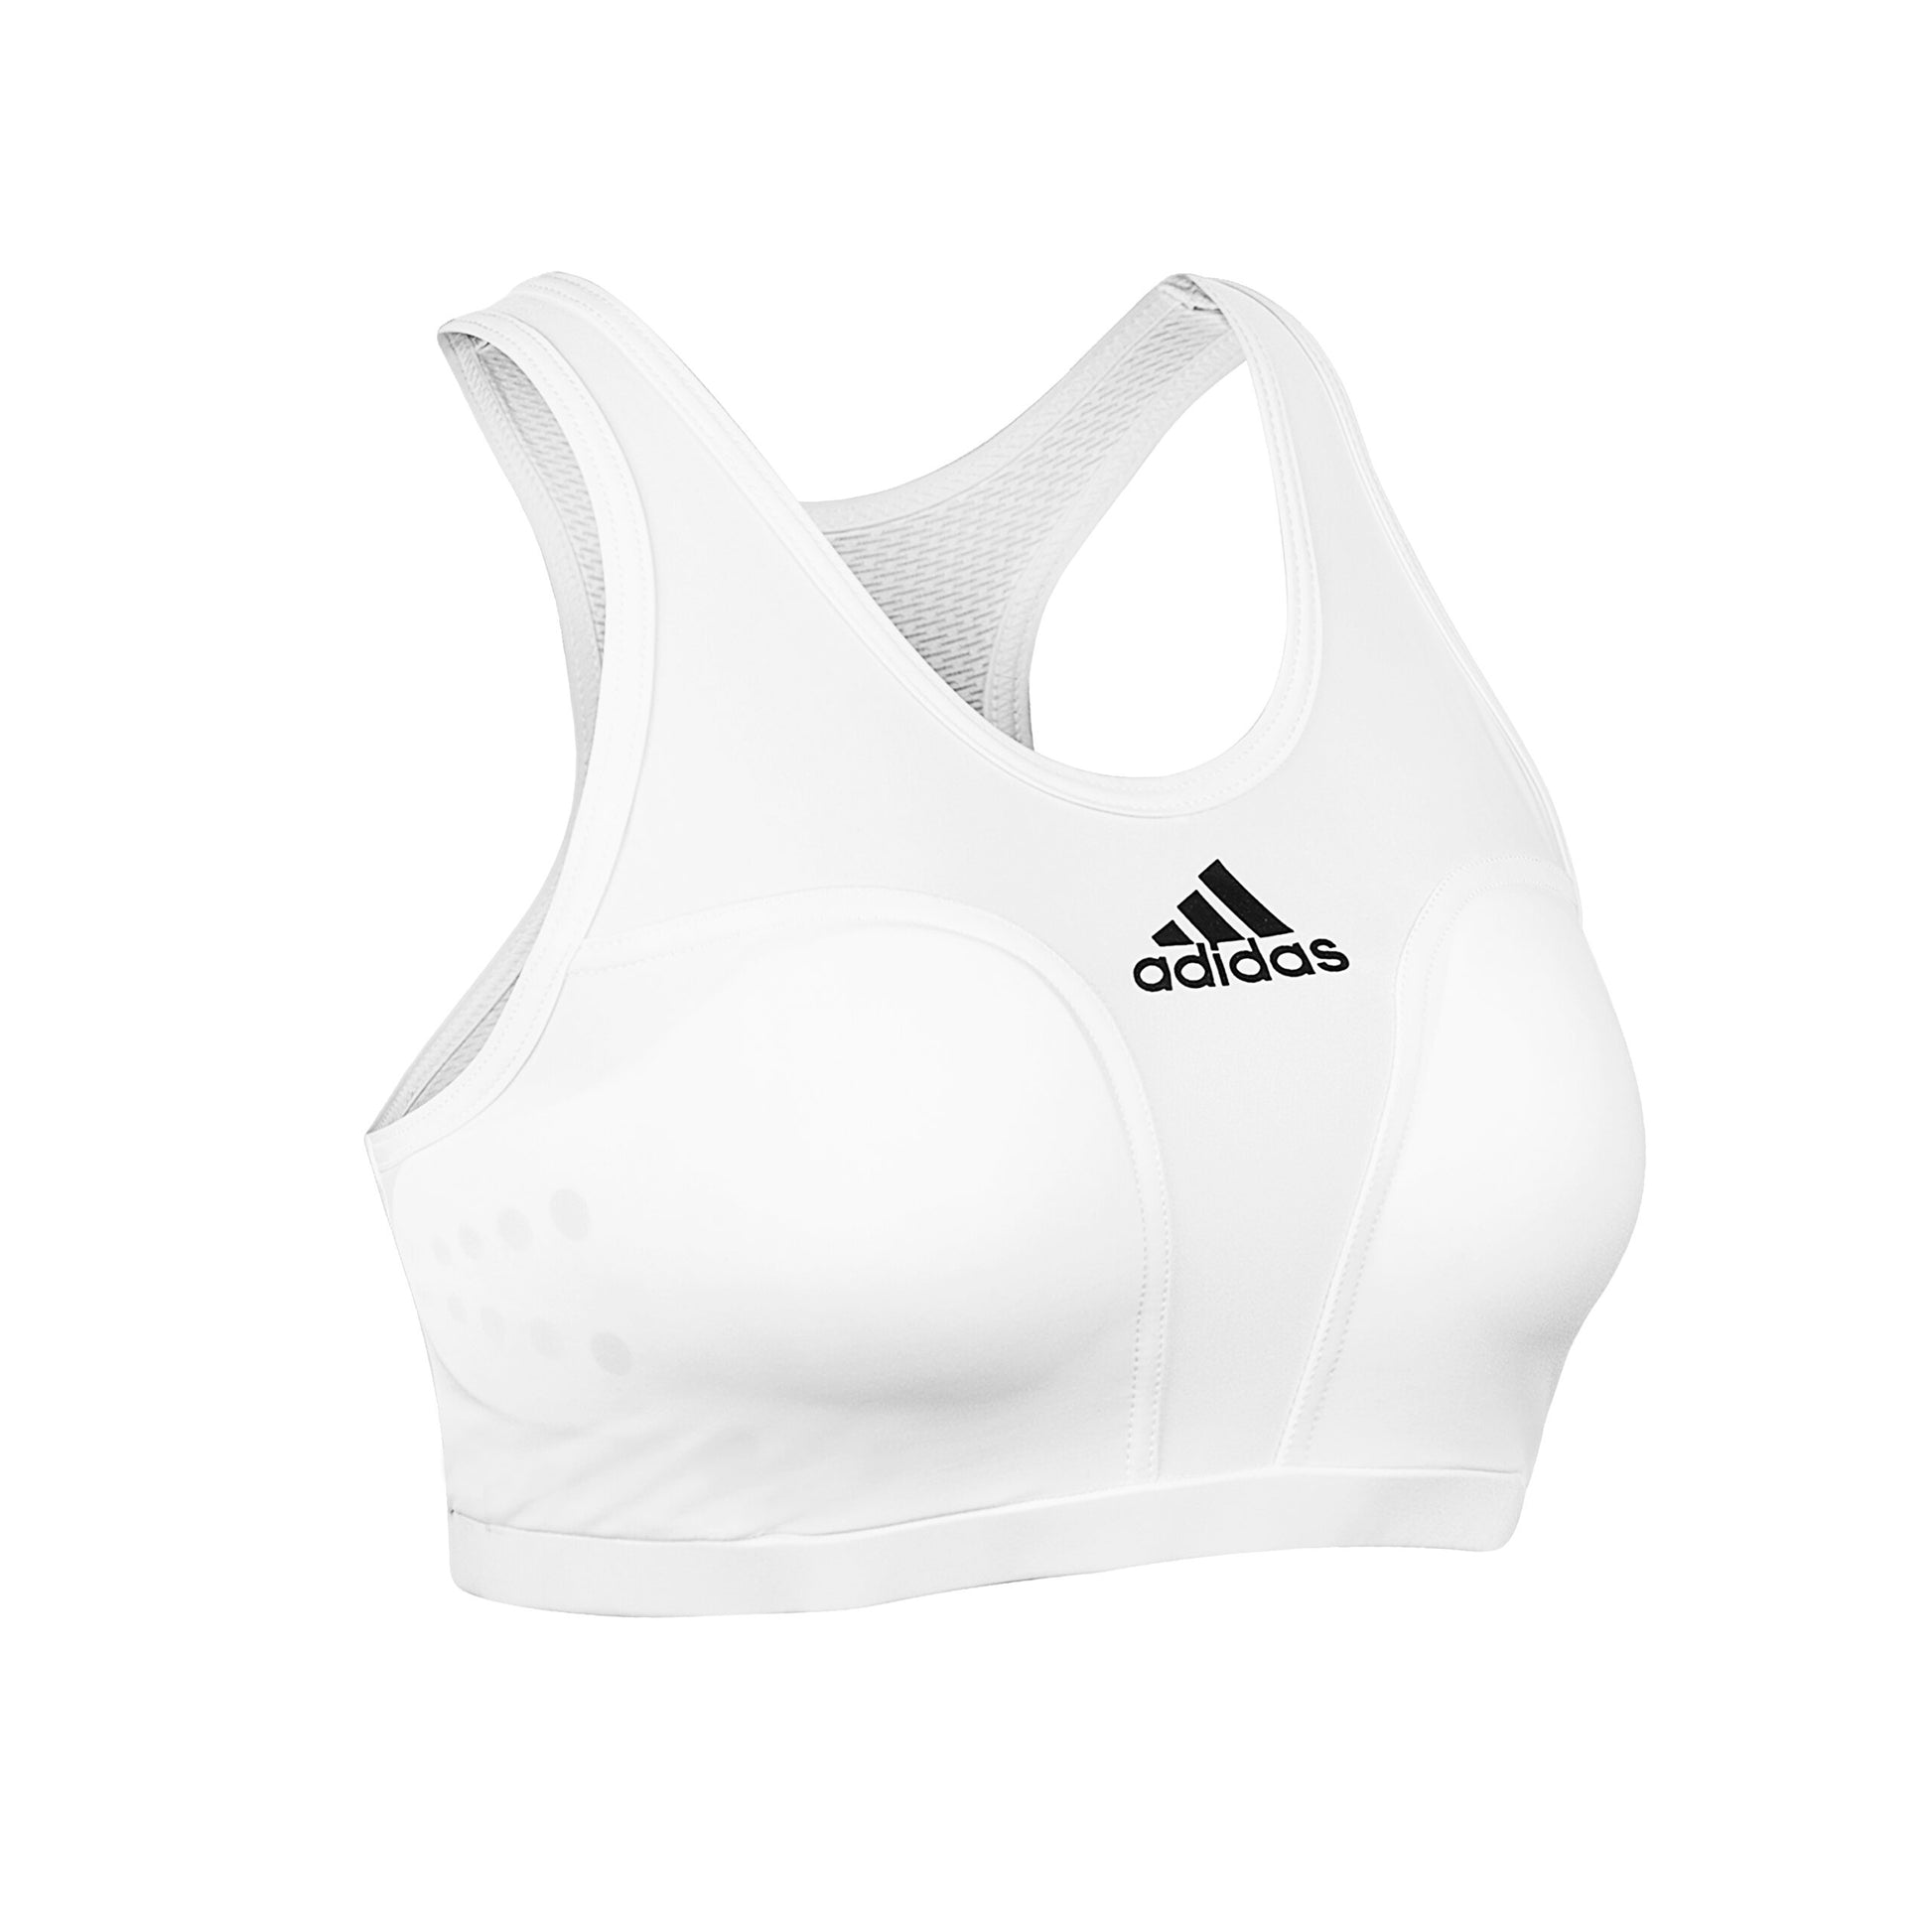 Adibp12 Adidas Wkf Approved Female Breast Protector White 02